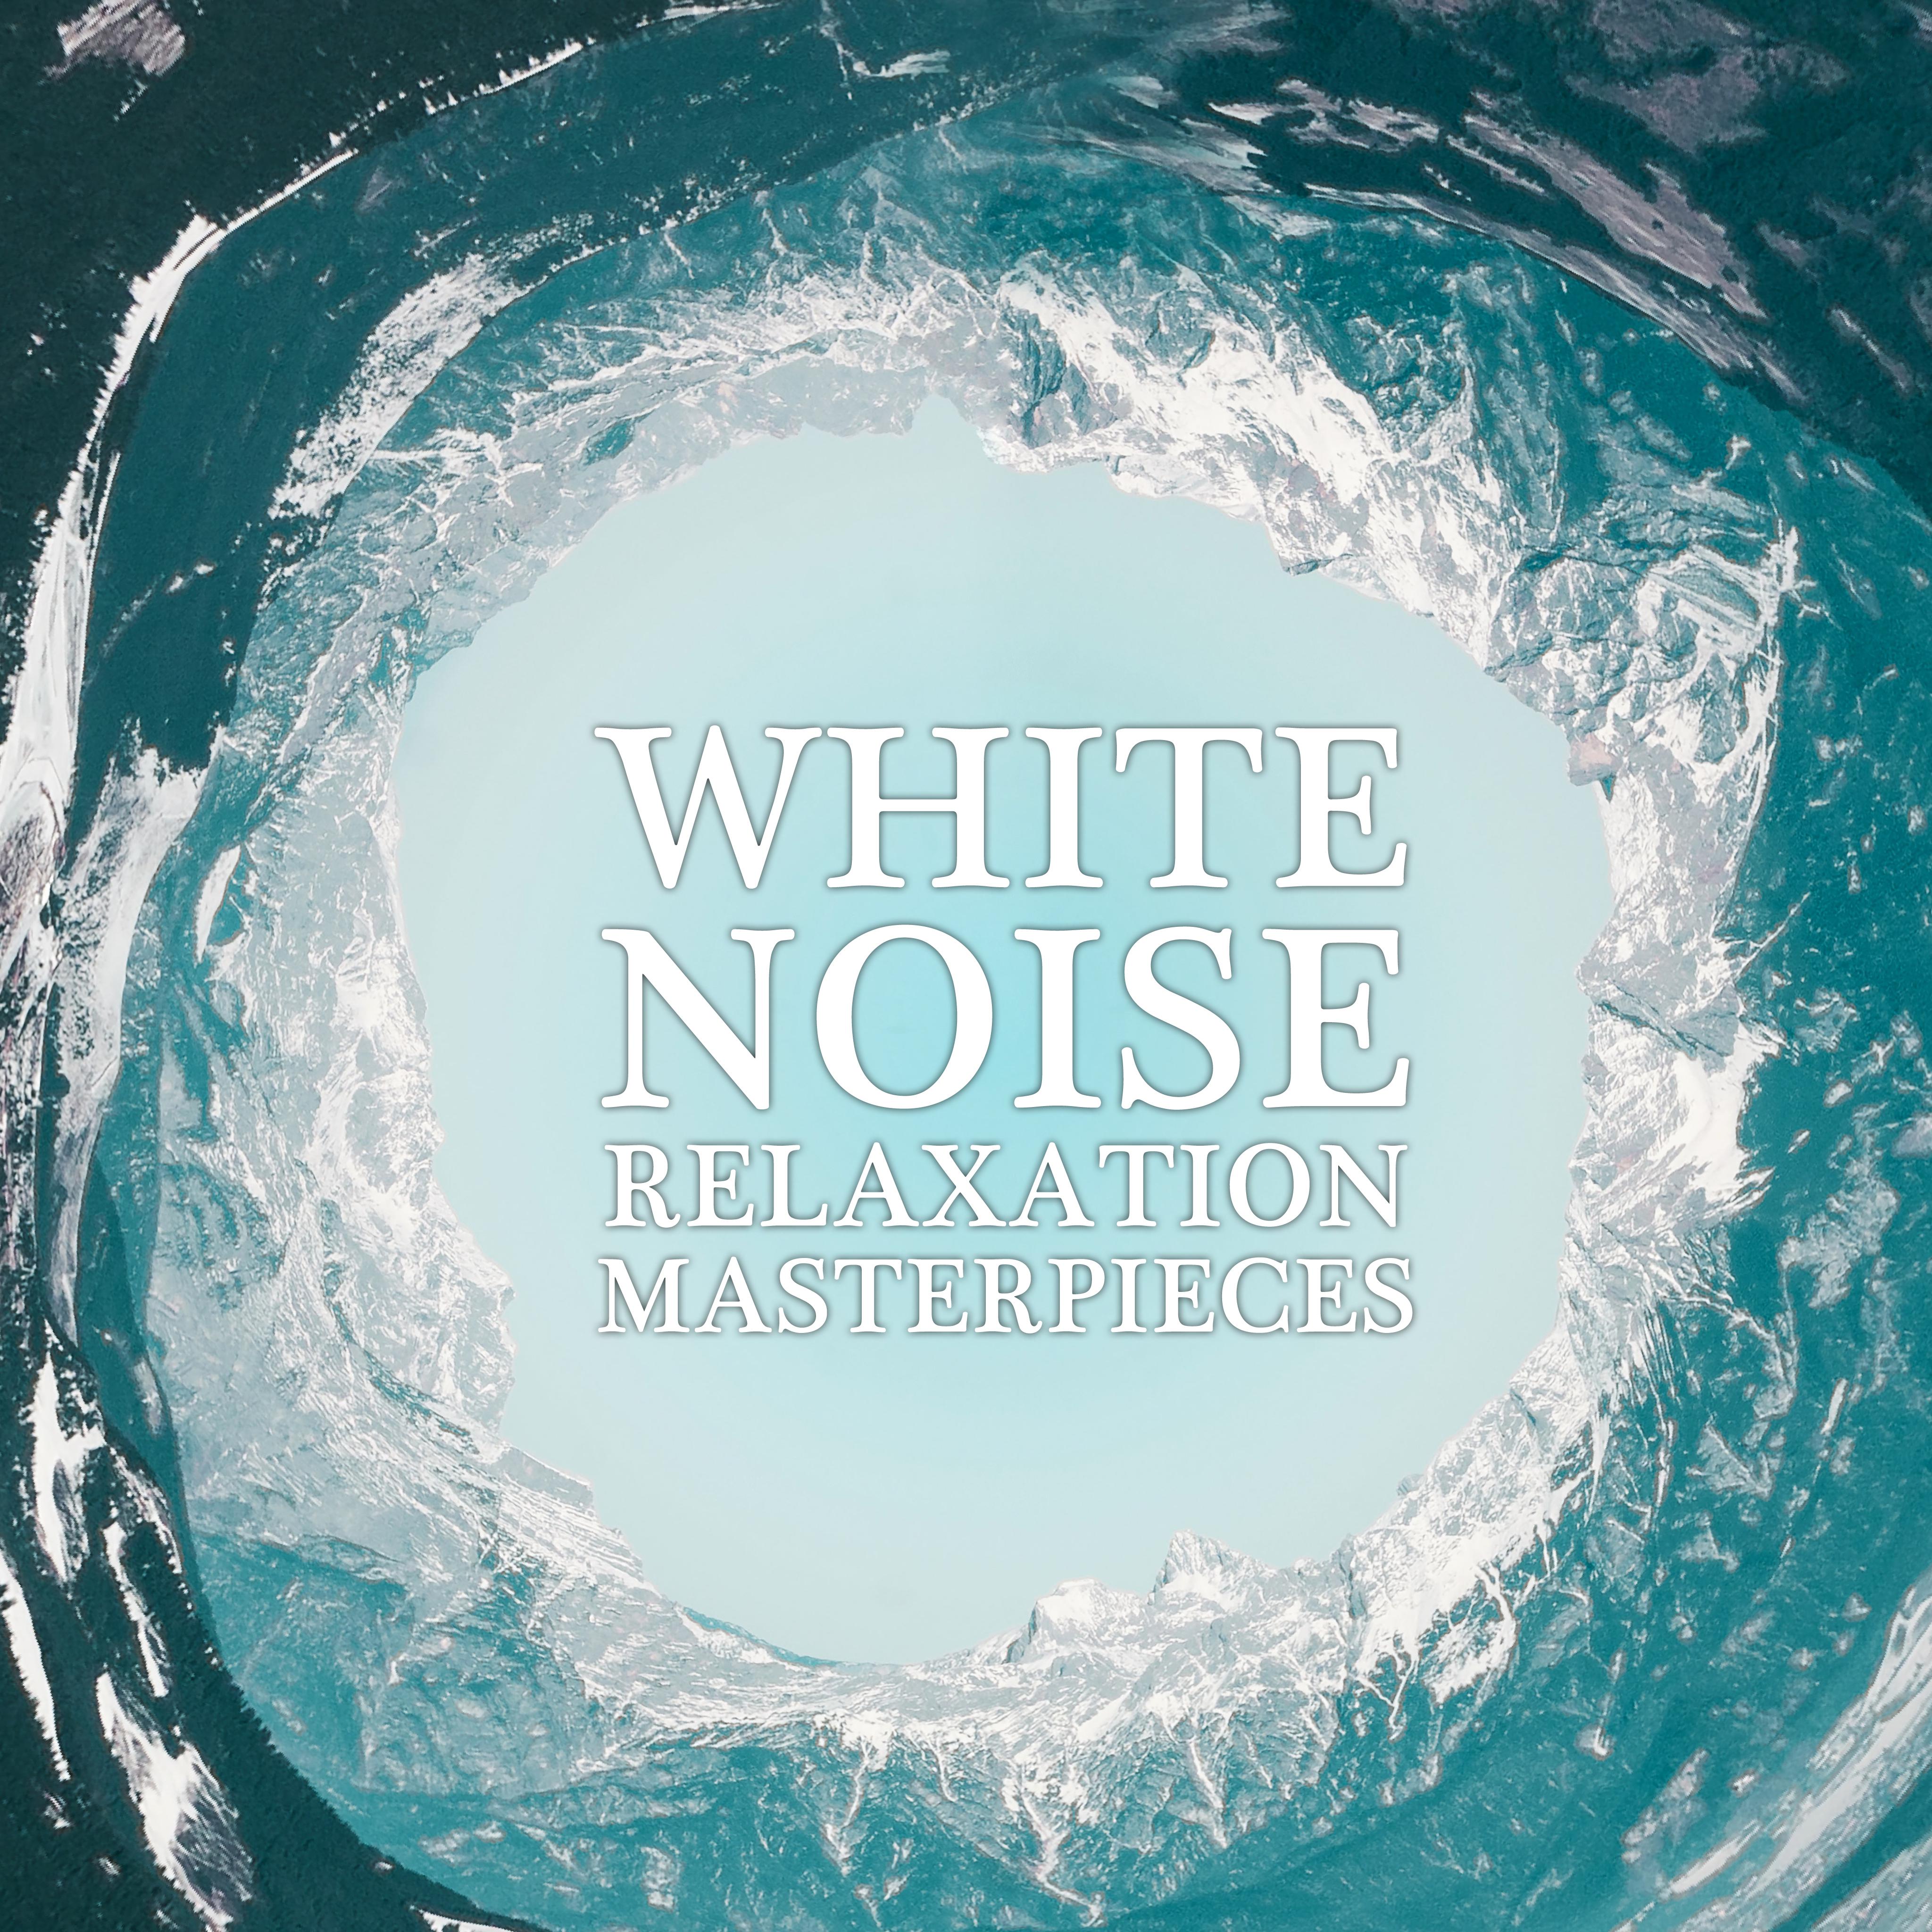 18 White Noise Relaxation Masterpieces